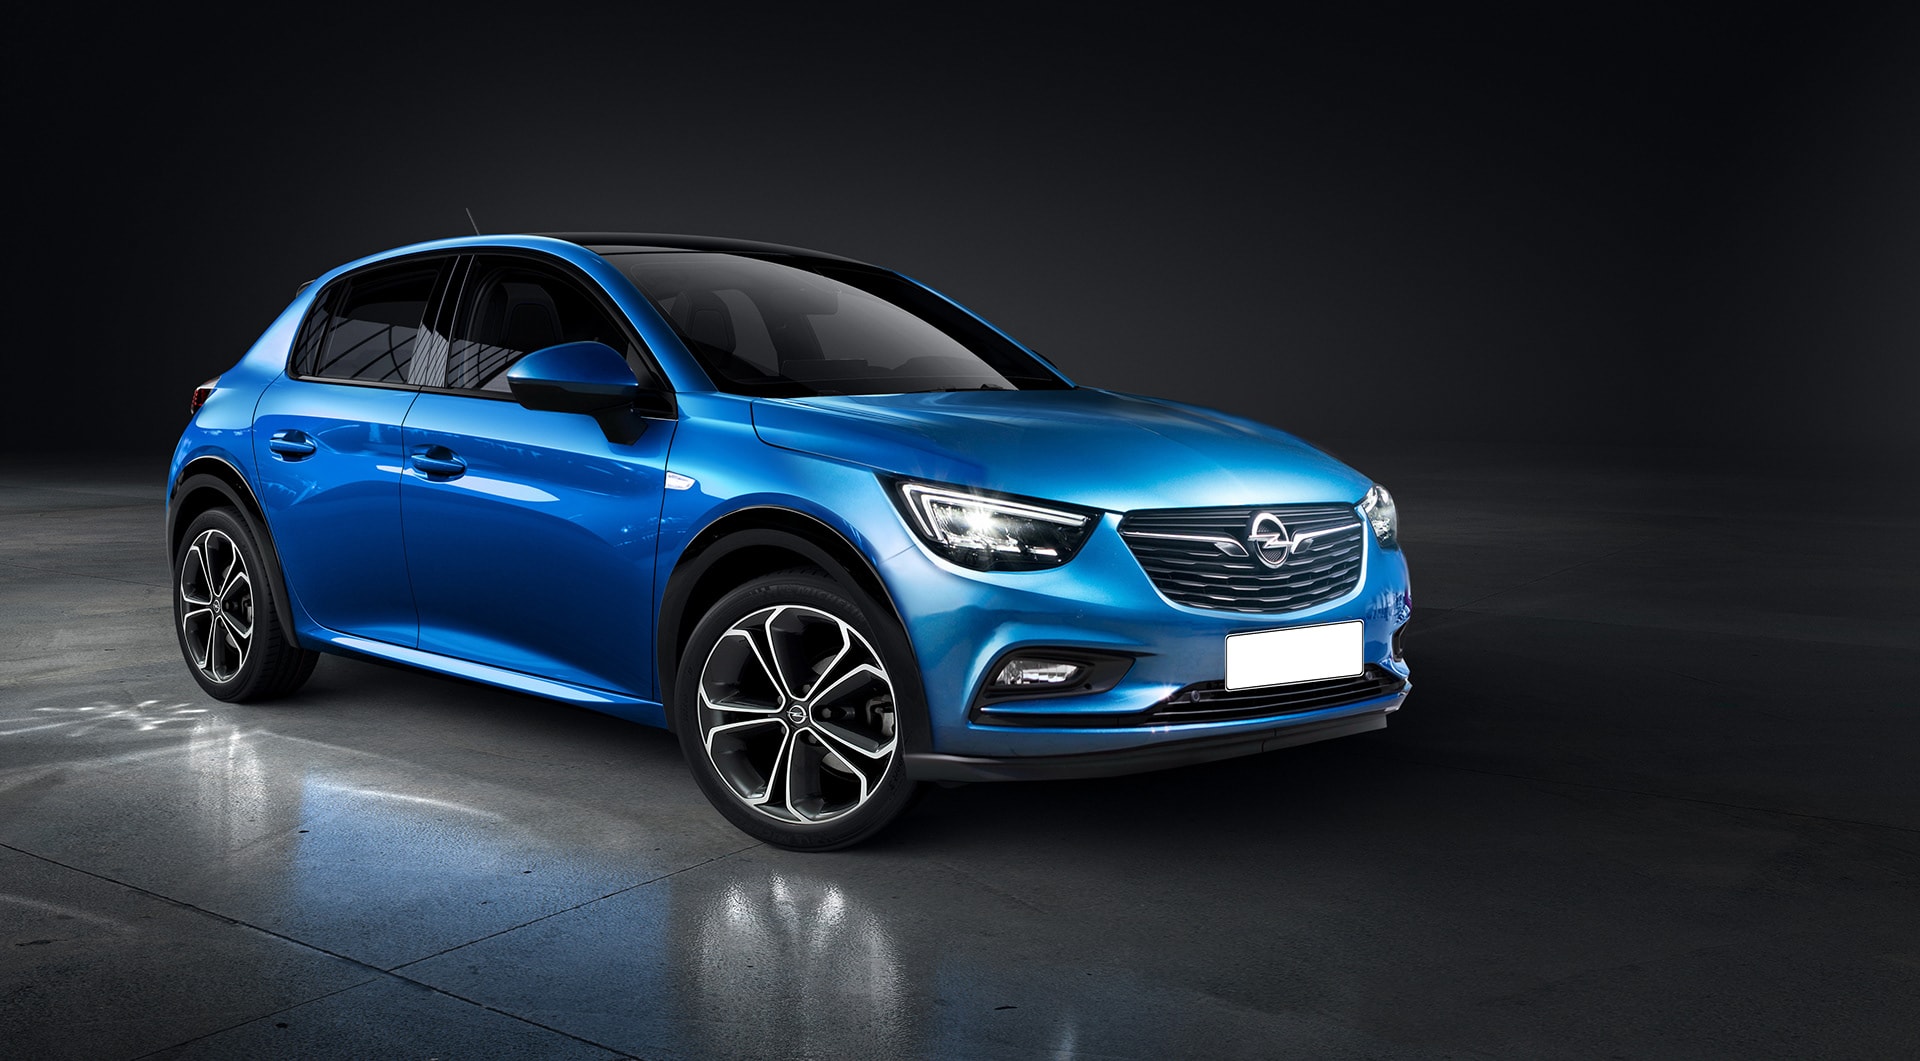 This 2020 Opel Corsa Rendering Has Crossover Inspiration - autoevolution